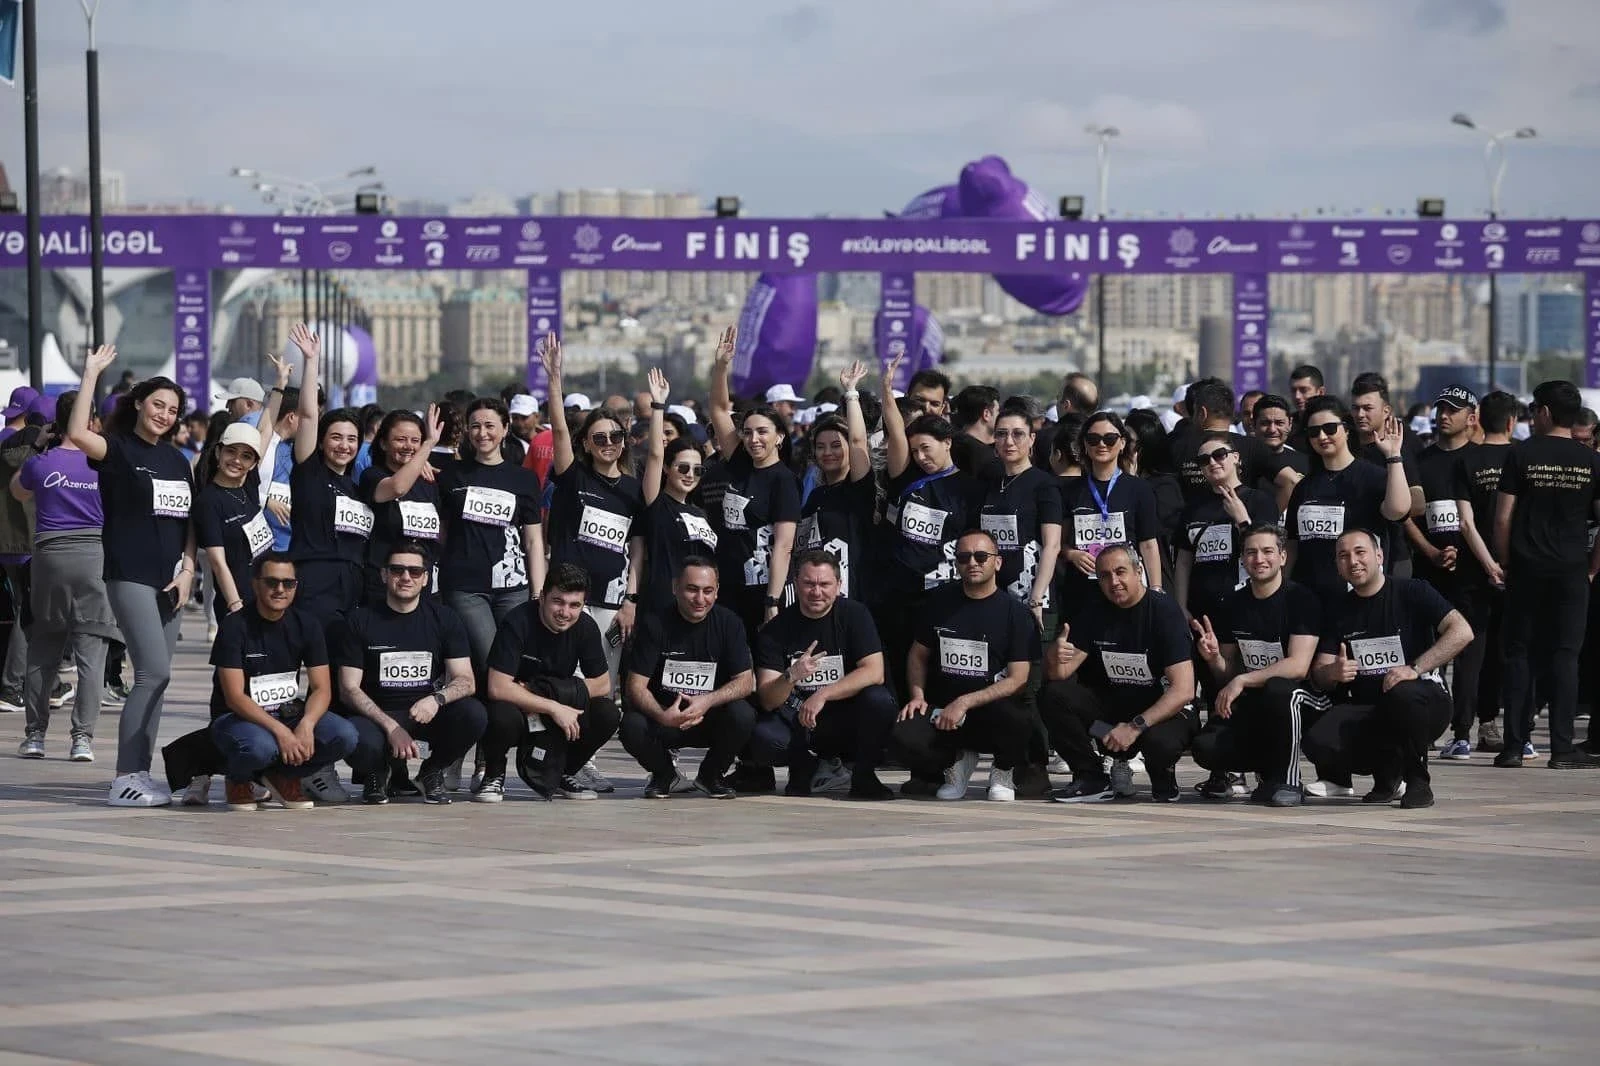 Committee employees participated in the Baku Marathon